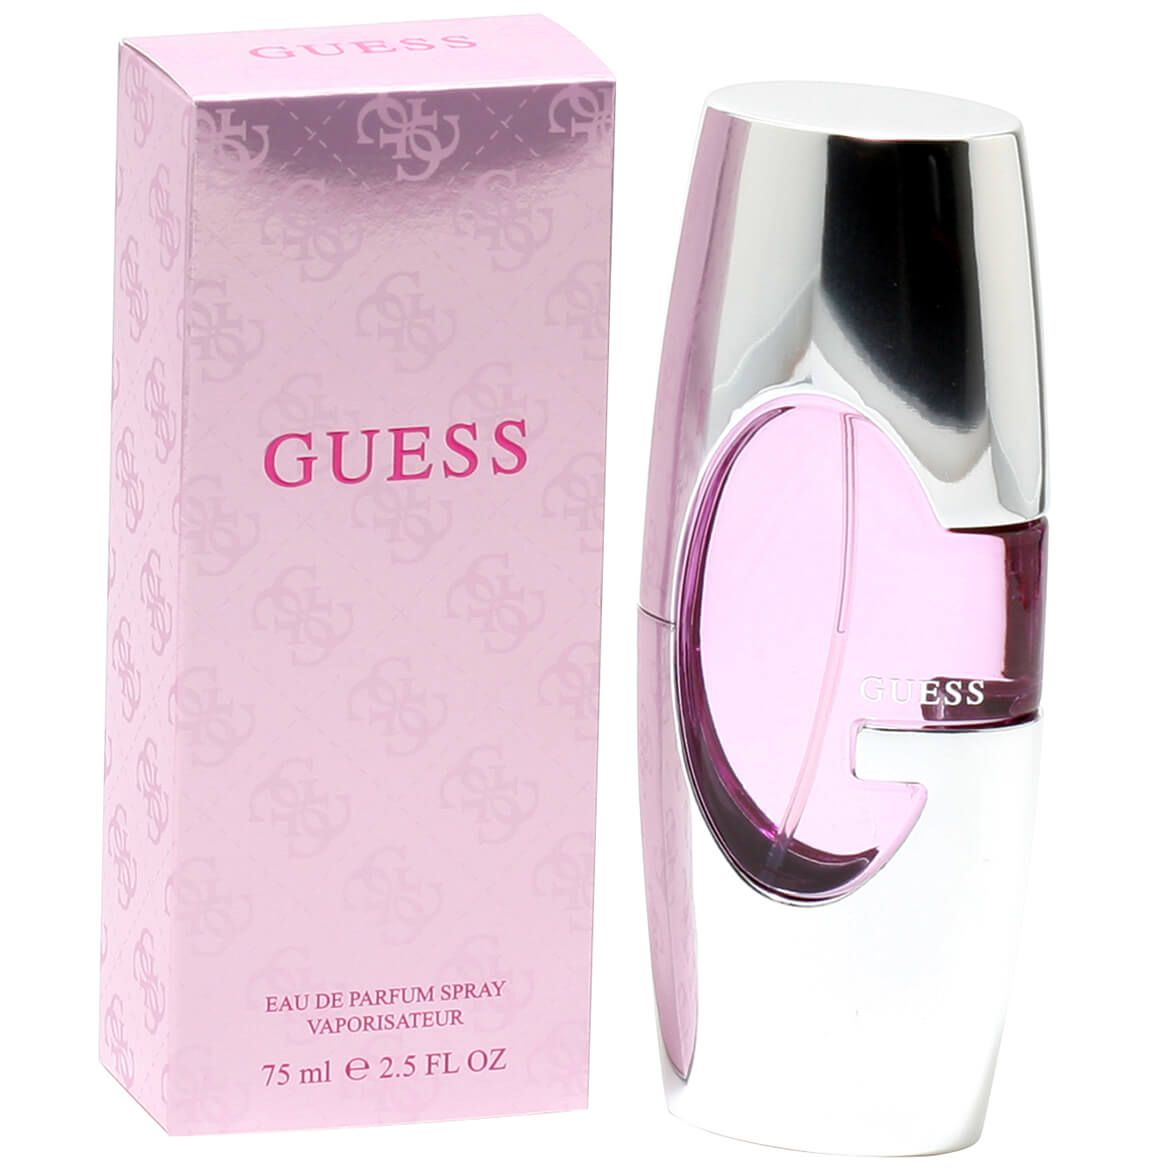 Guess For Women EDP Spray + '-' + 350144